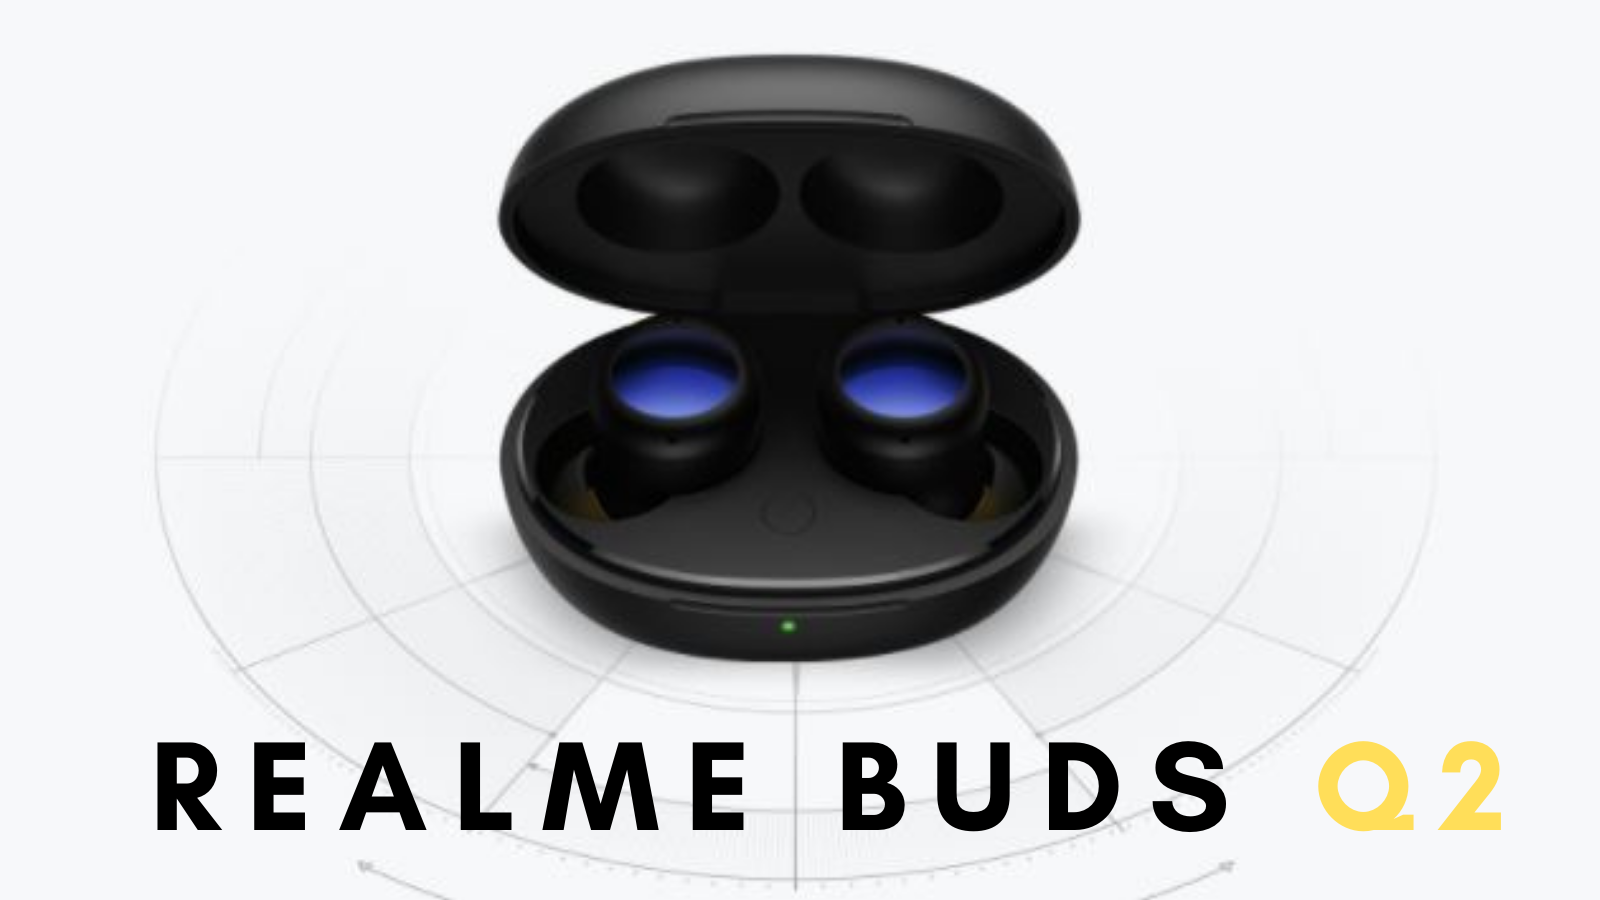 Realme Buds Q2 debuted with ANC support and IPX5 resistance rating in India: Specs, Price